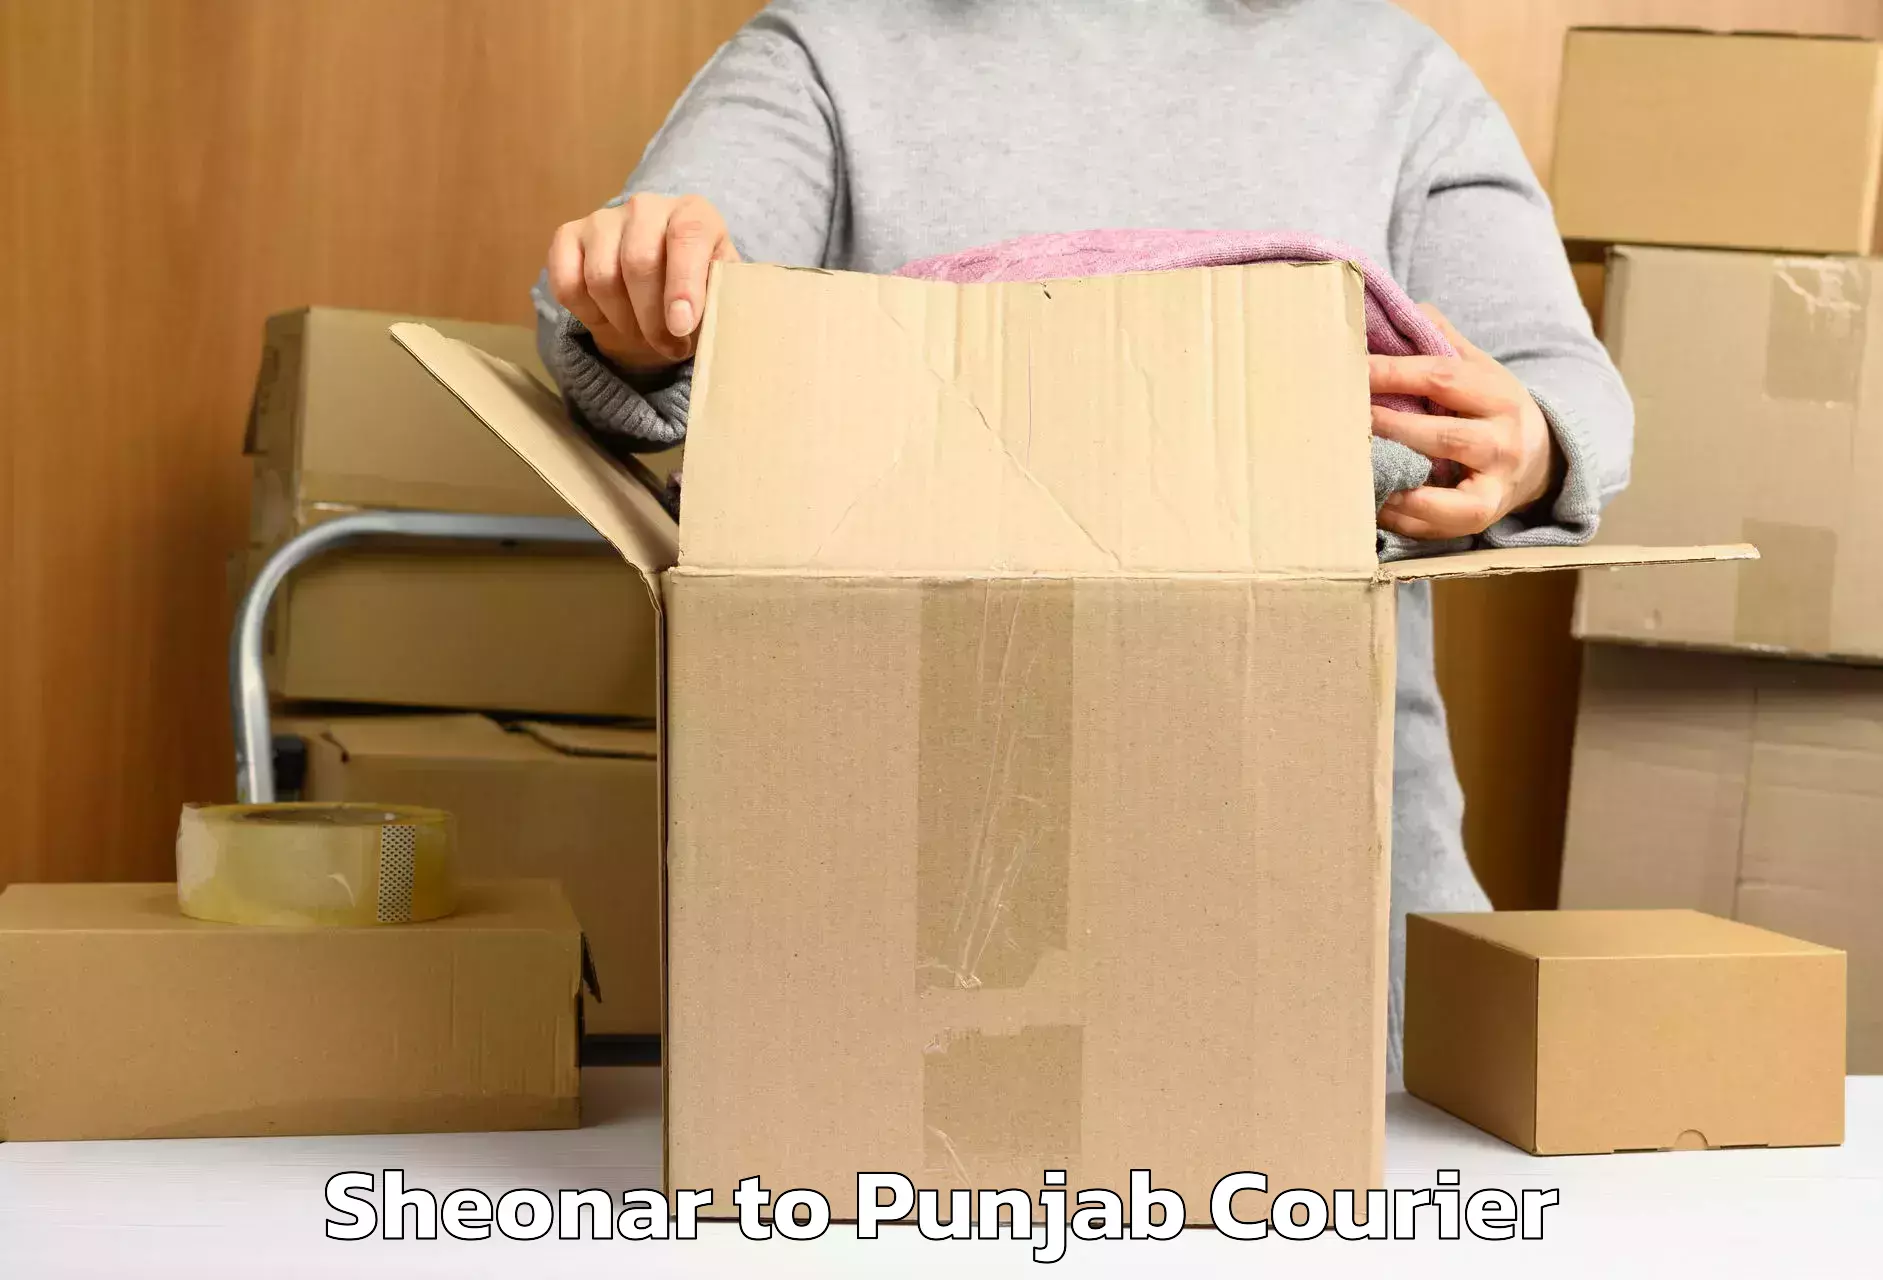 Luggage transport guidelines Sheonar to Ludhiana